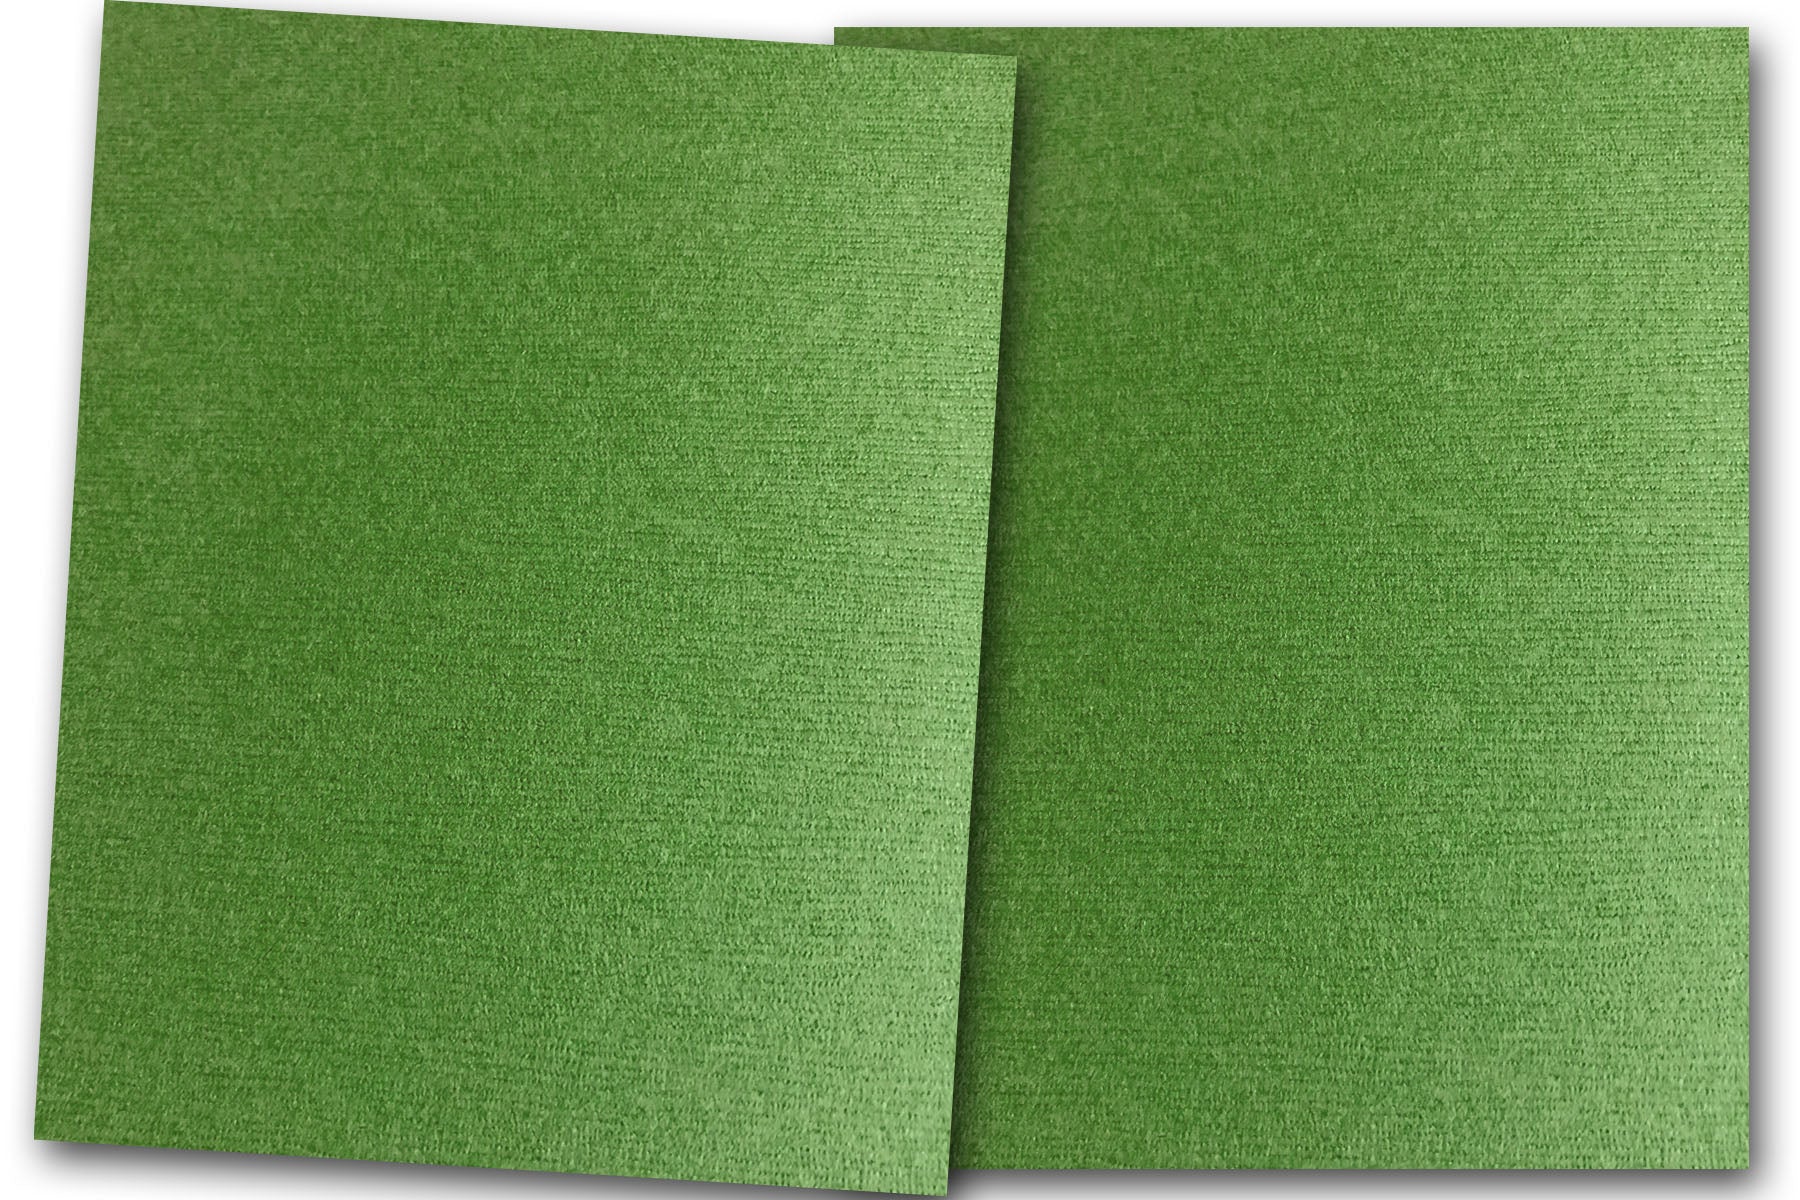 Canvas Textured Green Discount Card Stock for DIY Christmas Cards